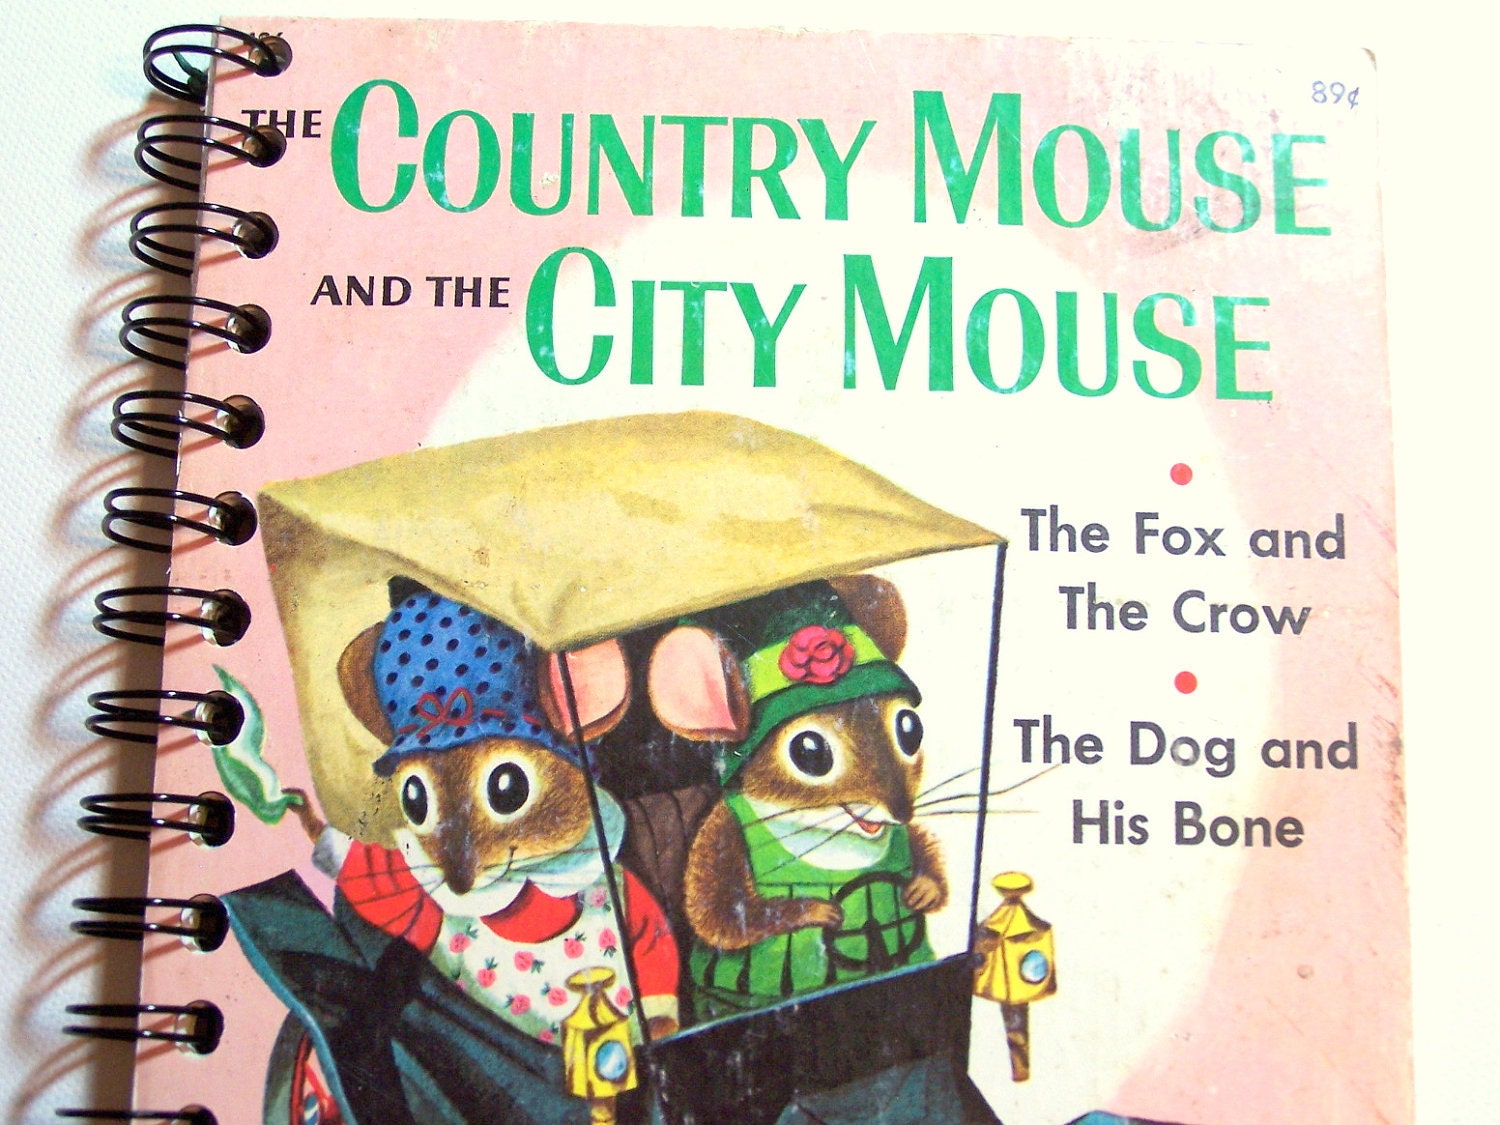 Upcycled Little Golden Book Notebook Upcycled Childrens Book Upcycled Notebook:  The Country Mouse and the City Mouse Notebook